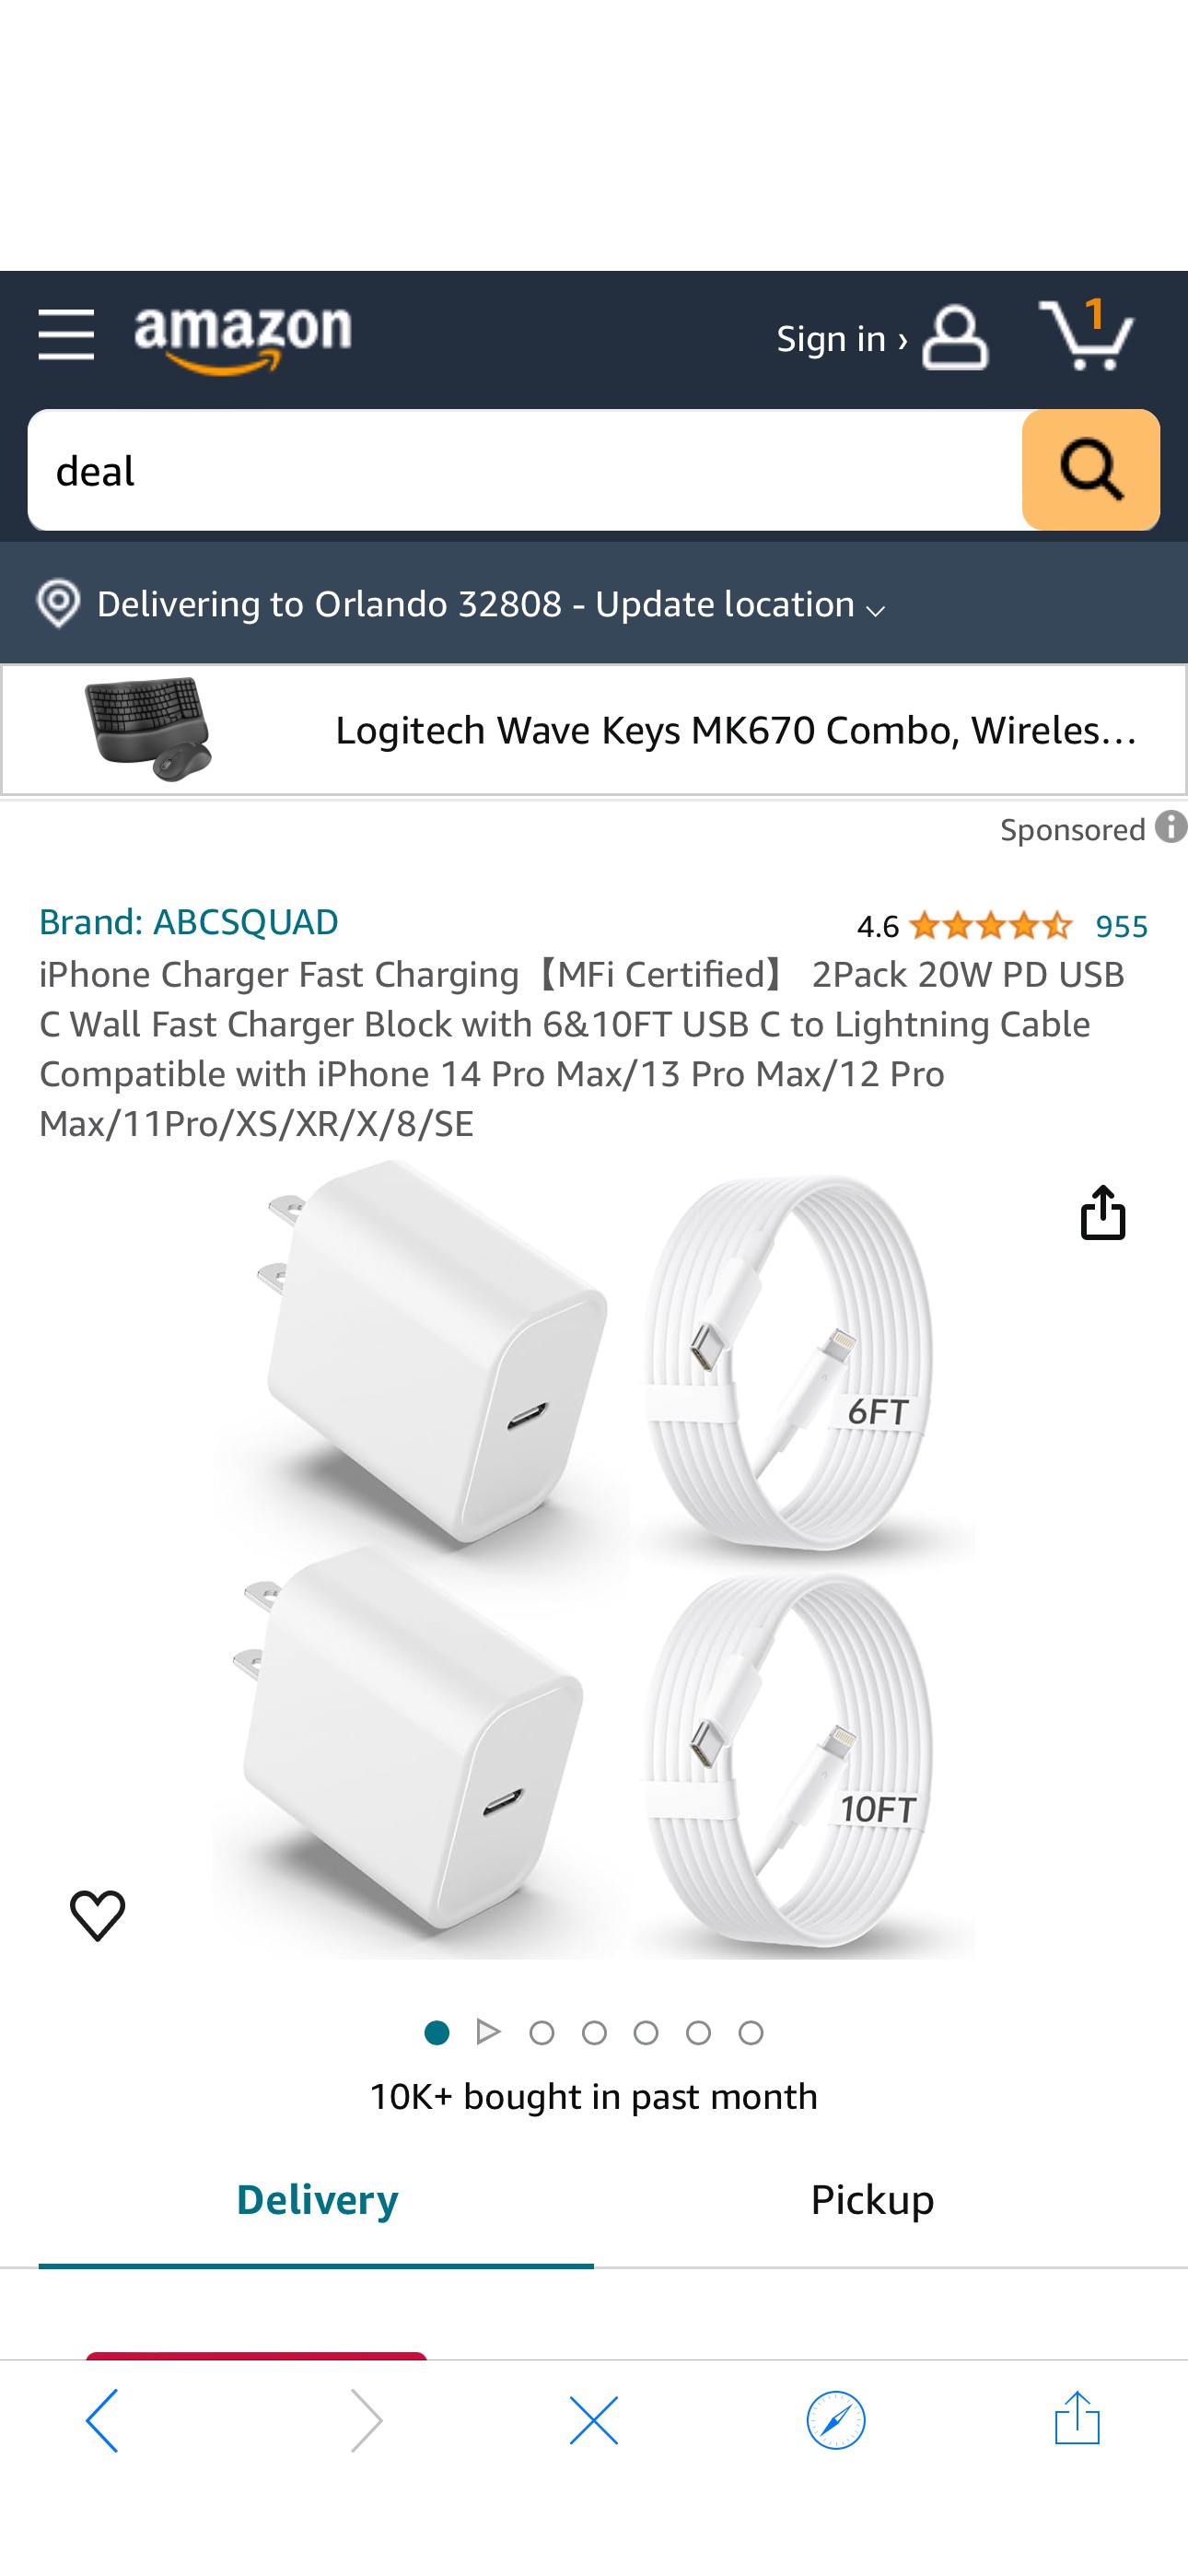 Amazon.com: iPhone Charger Fast Charging【MFi Certified】 2Pack 20W PD USB C Wall Fast Charger Block with 6&10FT USB C to Lightning Cable Compatible with iPhone 14 Pro Max/13 Pro Max/12 Pro Max/11Pro/XS